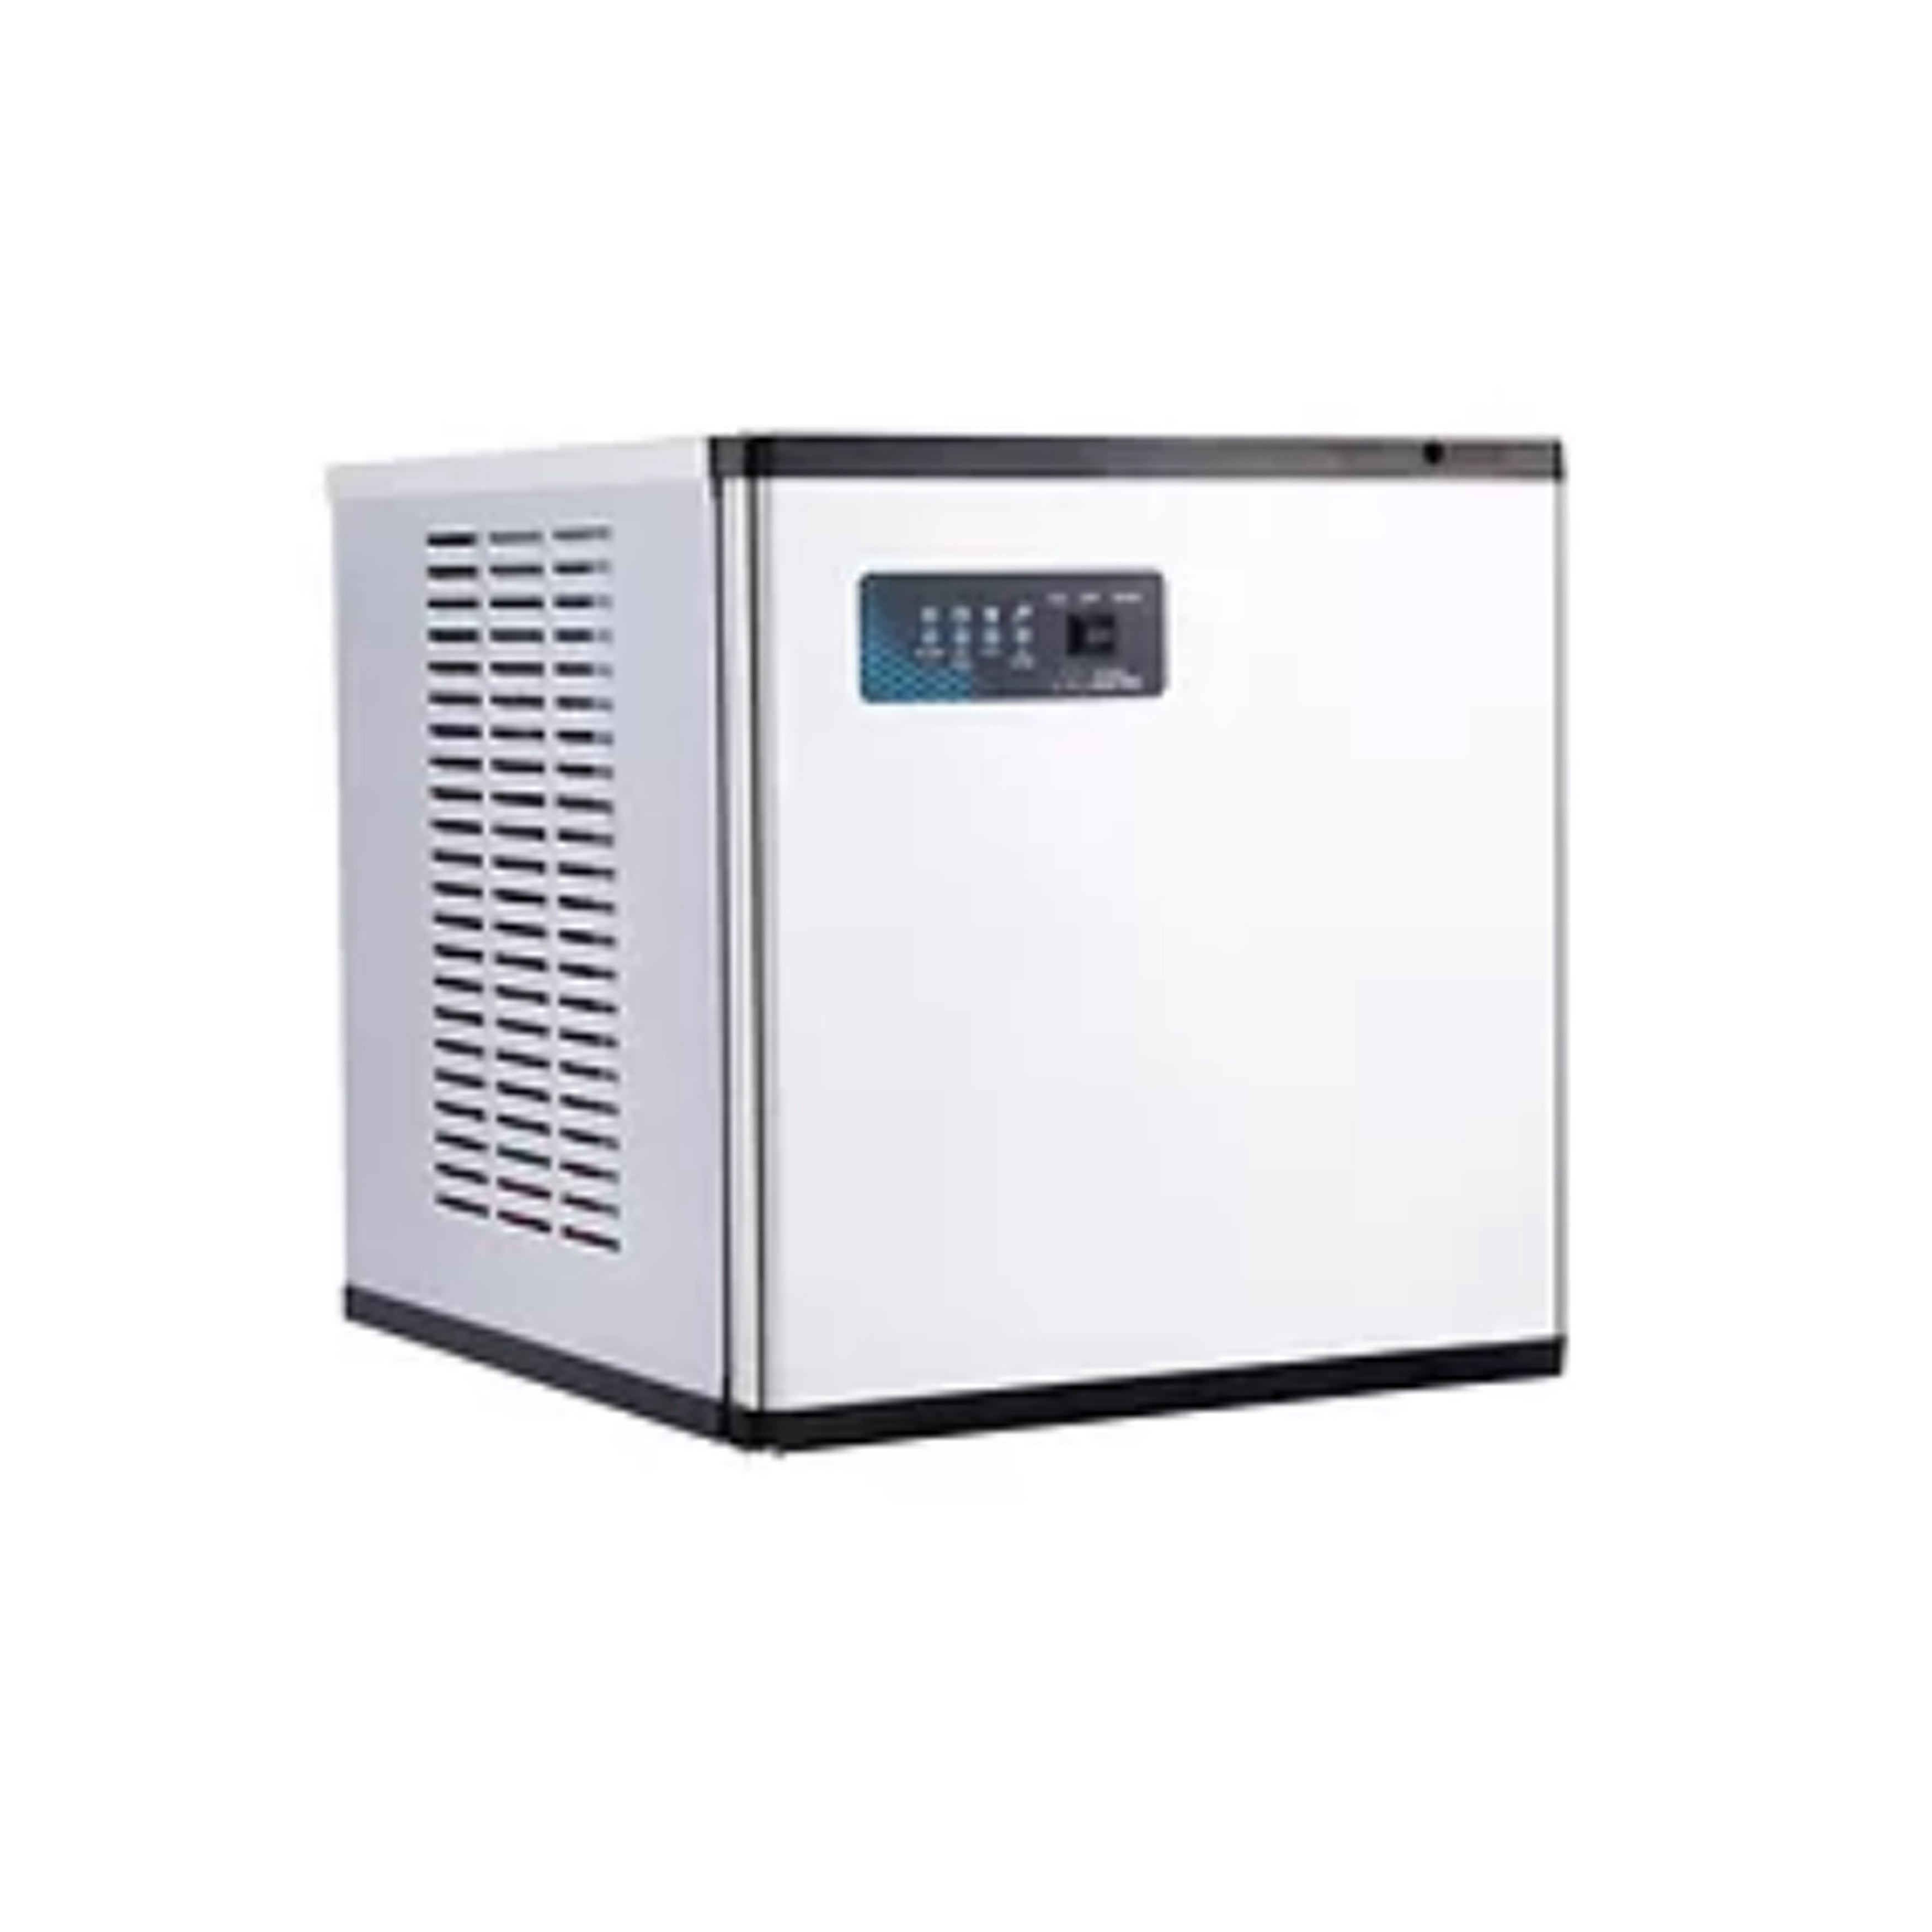 Chef AAA - SK-500P, Commercial 500Lbs Ice Cube Maker Ice Machine Air C